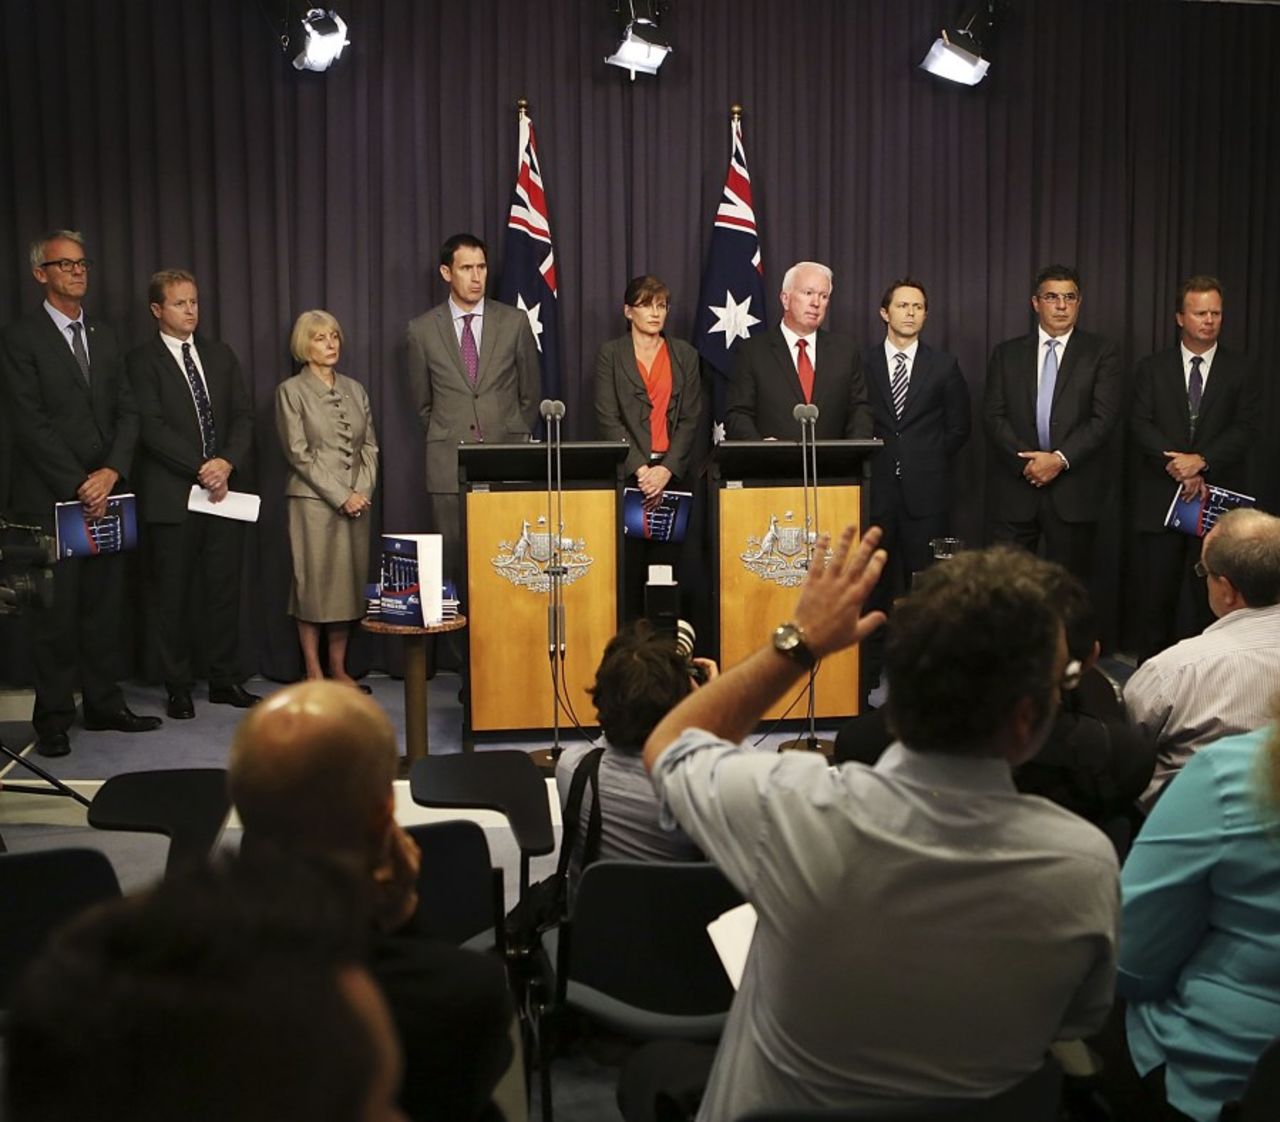 James Sutherland, and other sports and government leaders, at a press conference where some of the findings of the Australian Crime Commission's year-long investigation into sport were revealed, Canberra, February 7, 2013